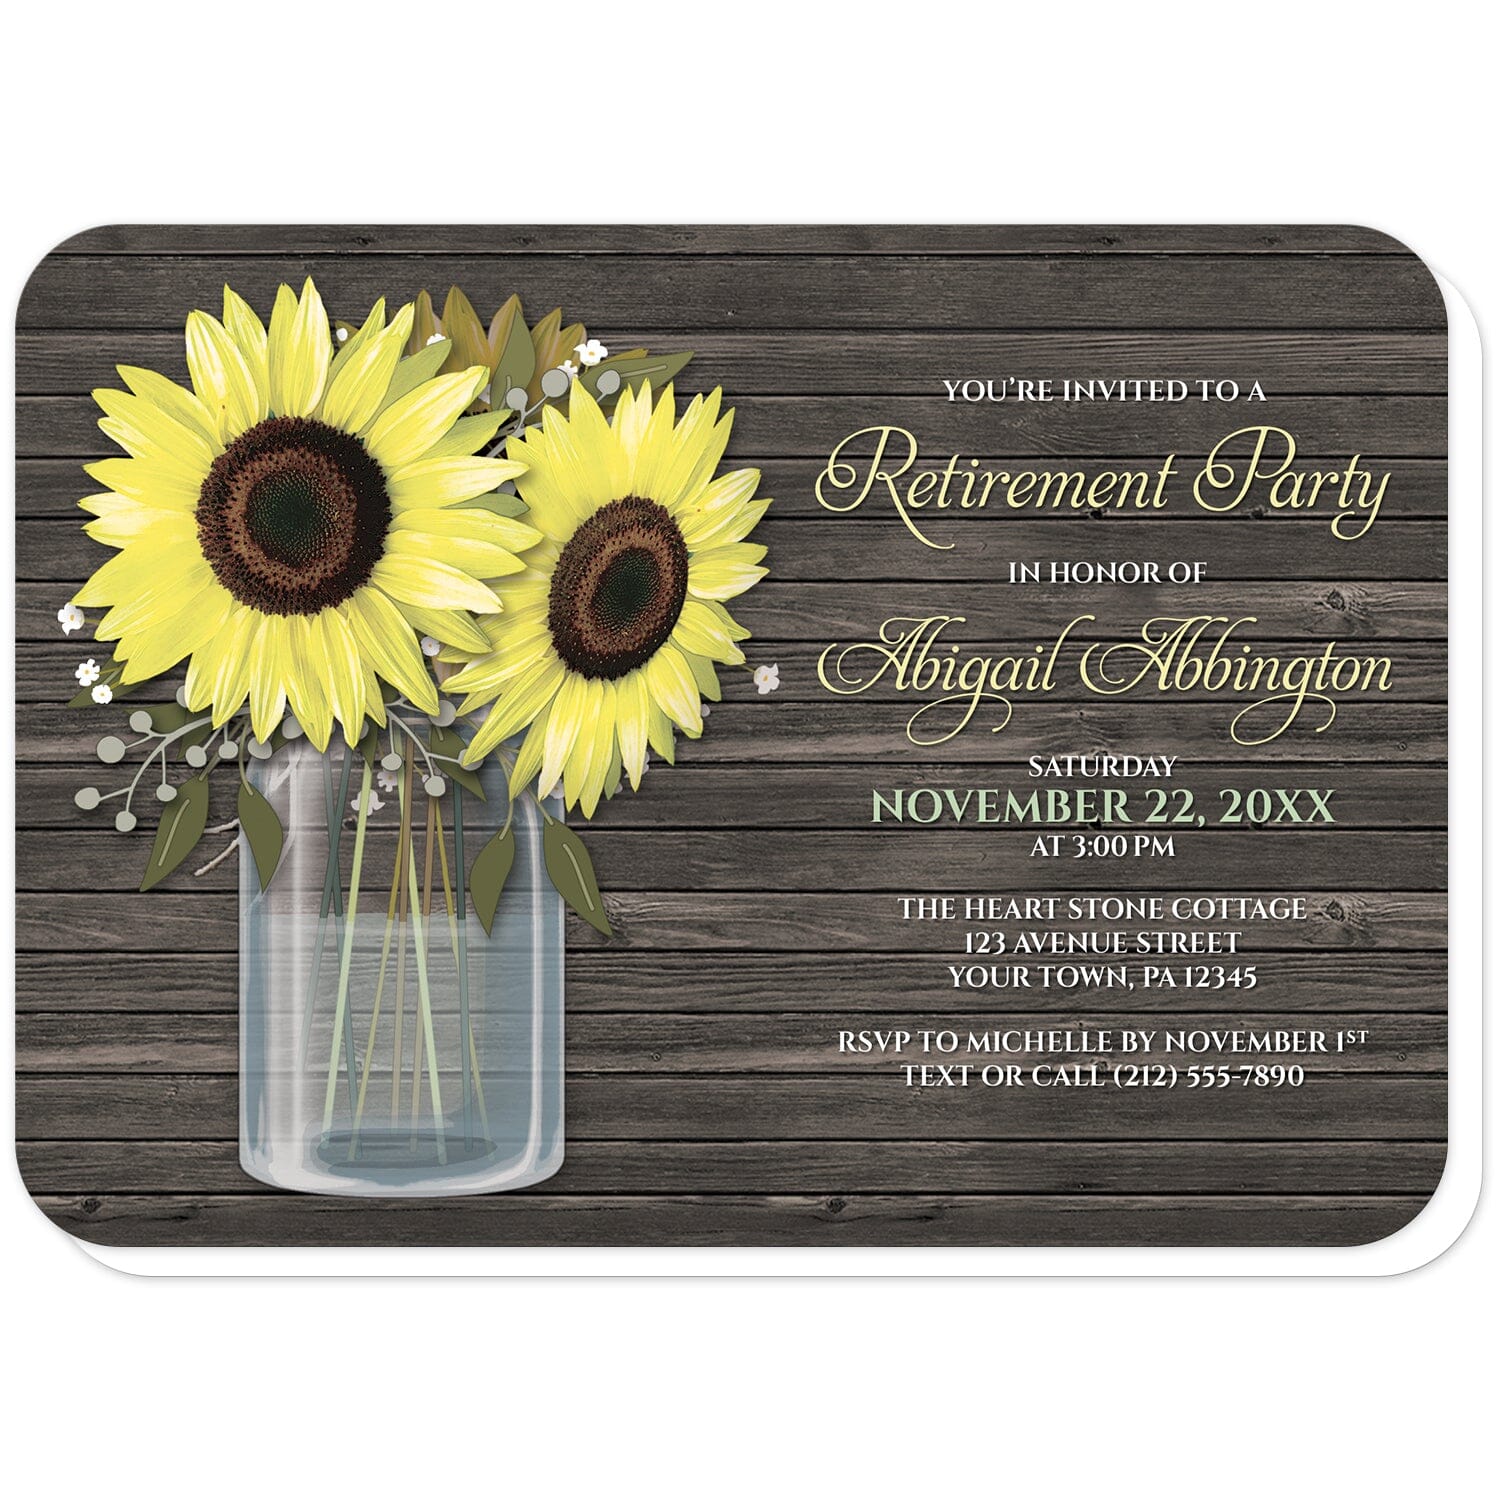 Rustic Sunflower Wood Mason Jar Retirement Invitations (with rounded corners) at Artistically Invited. Southern country-inspired rustic sunflower wood mason jar retirement invitations with big yellow sunflowers, small accents of baby's breath, and green leaves in a glass mason jar illustration. Your personalized retirement party details are custom printed in yellow and white to the right of the sunflowers and mason jar design over a dark brown wood background.